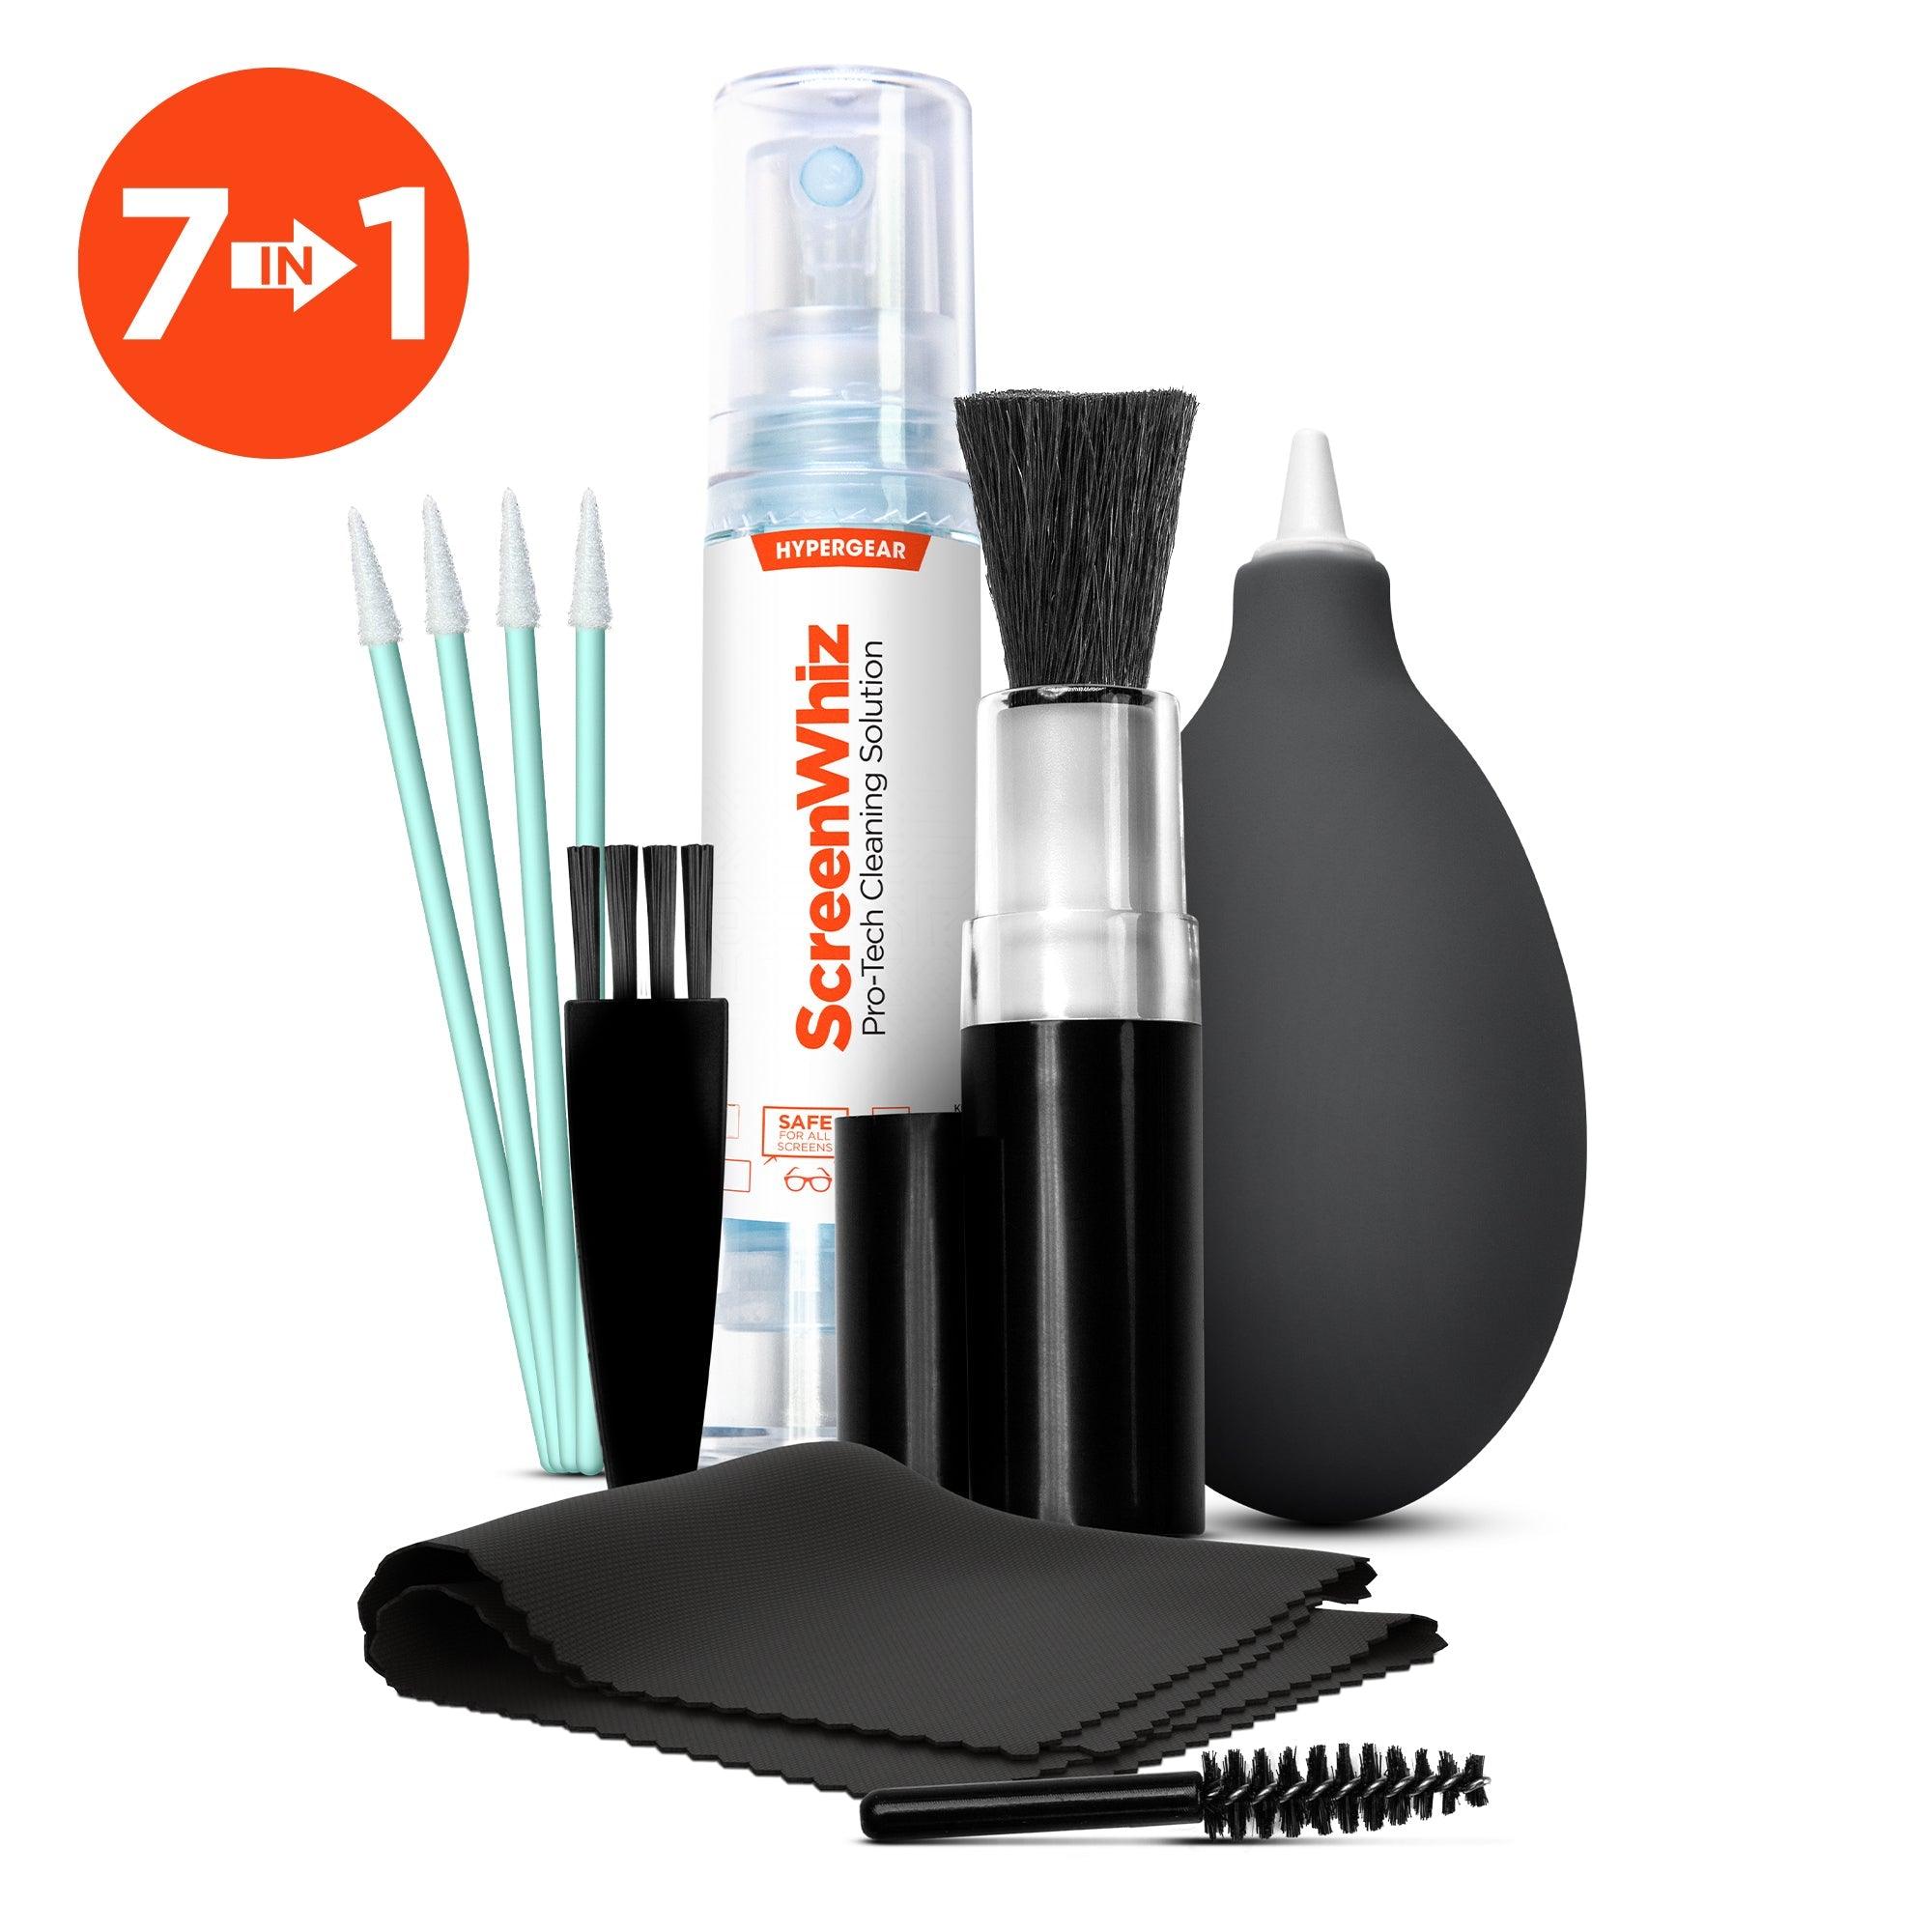 ScreenWhiz 7-in-1 Complete Tech Cleaning Kit